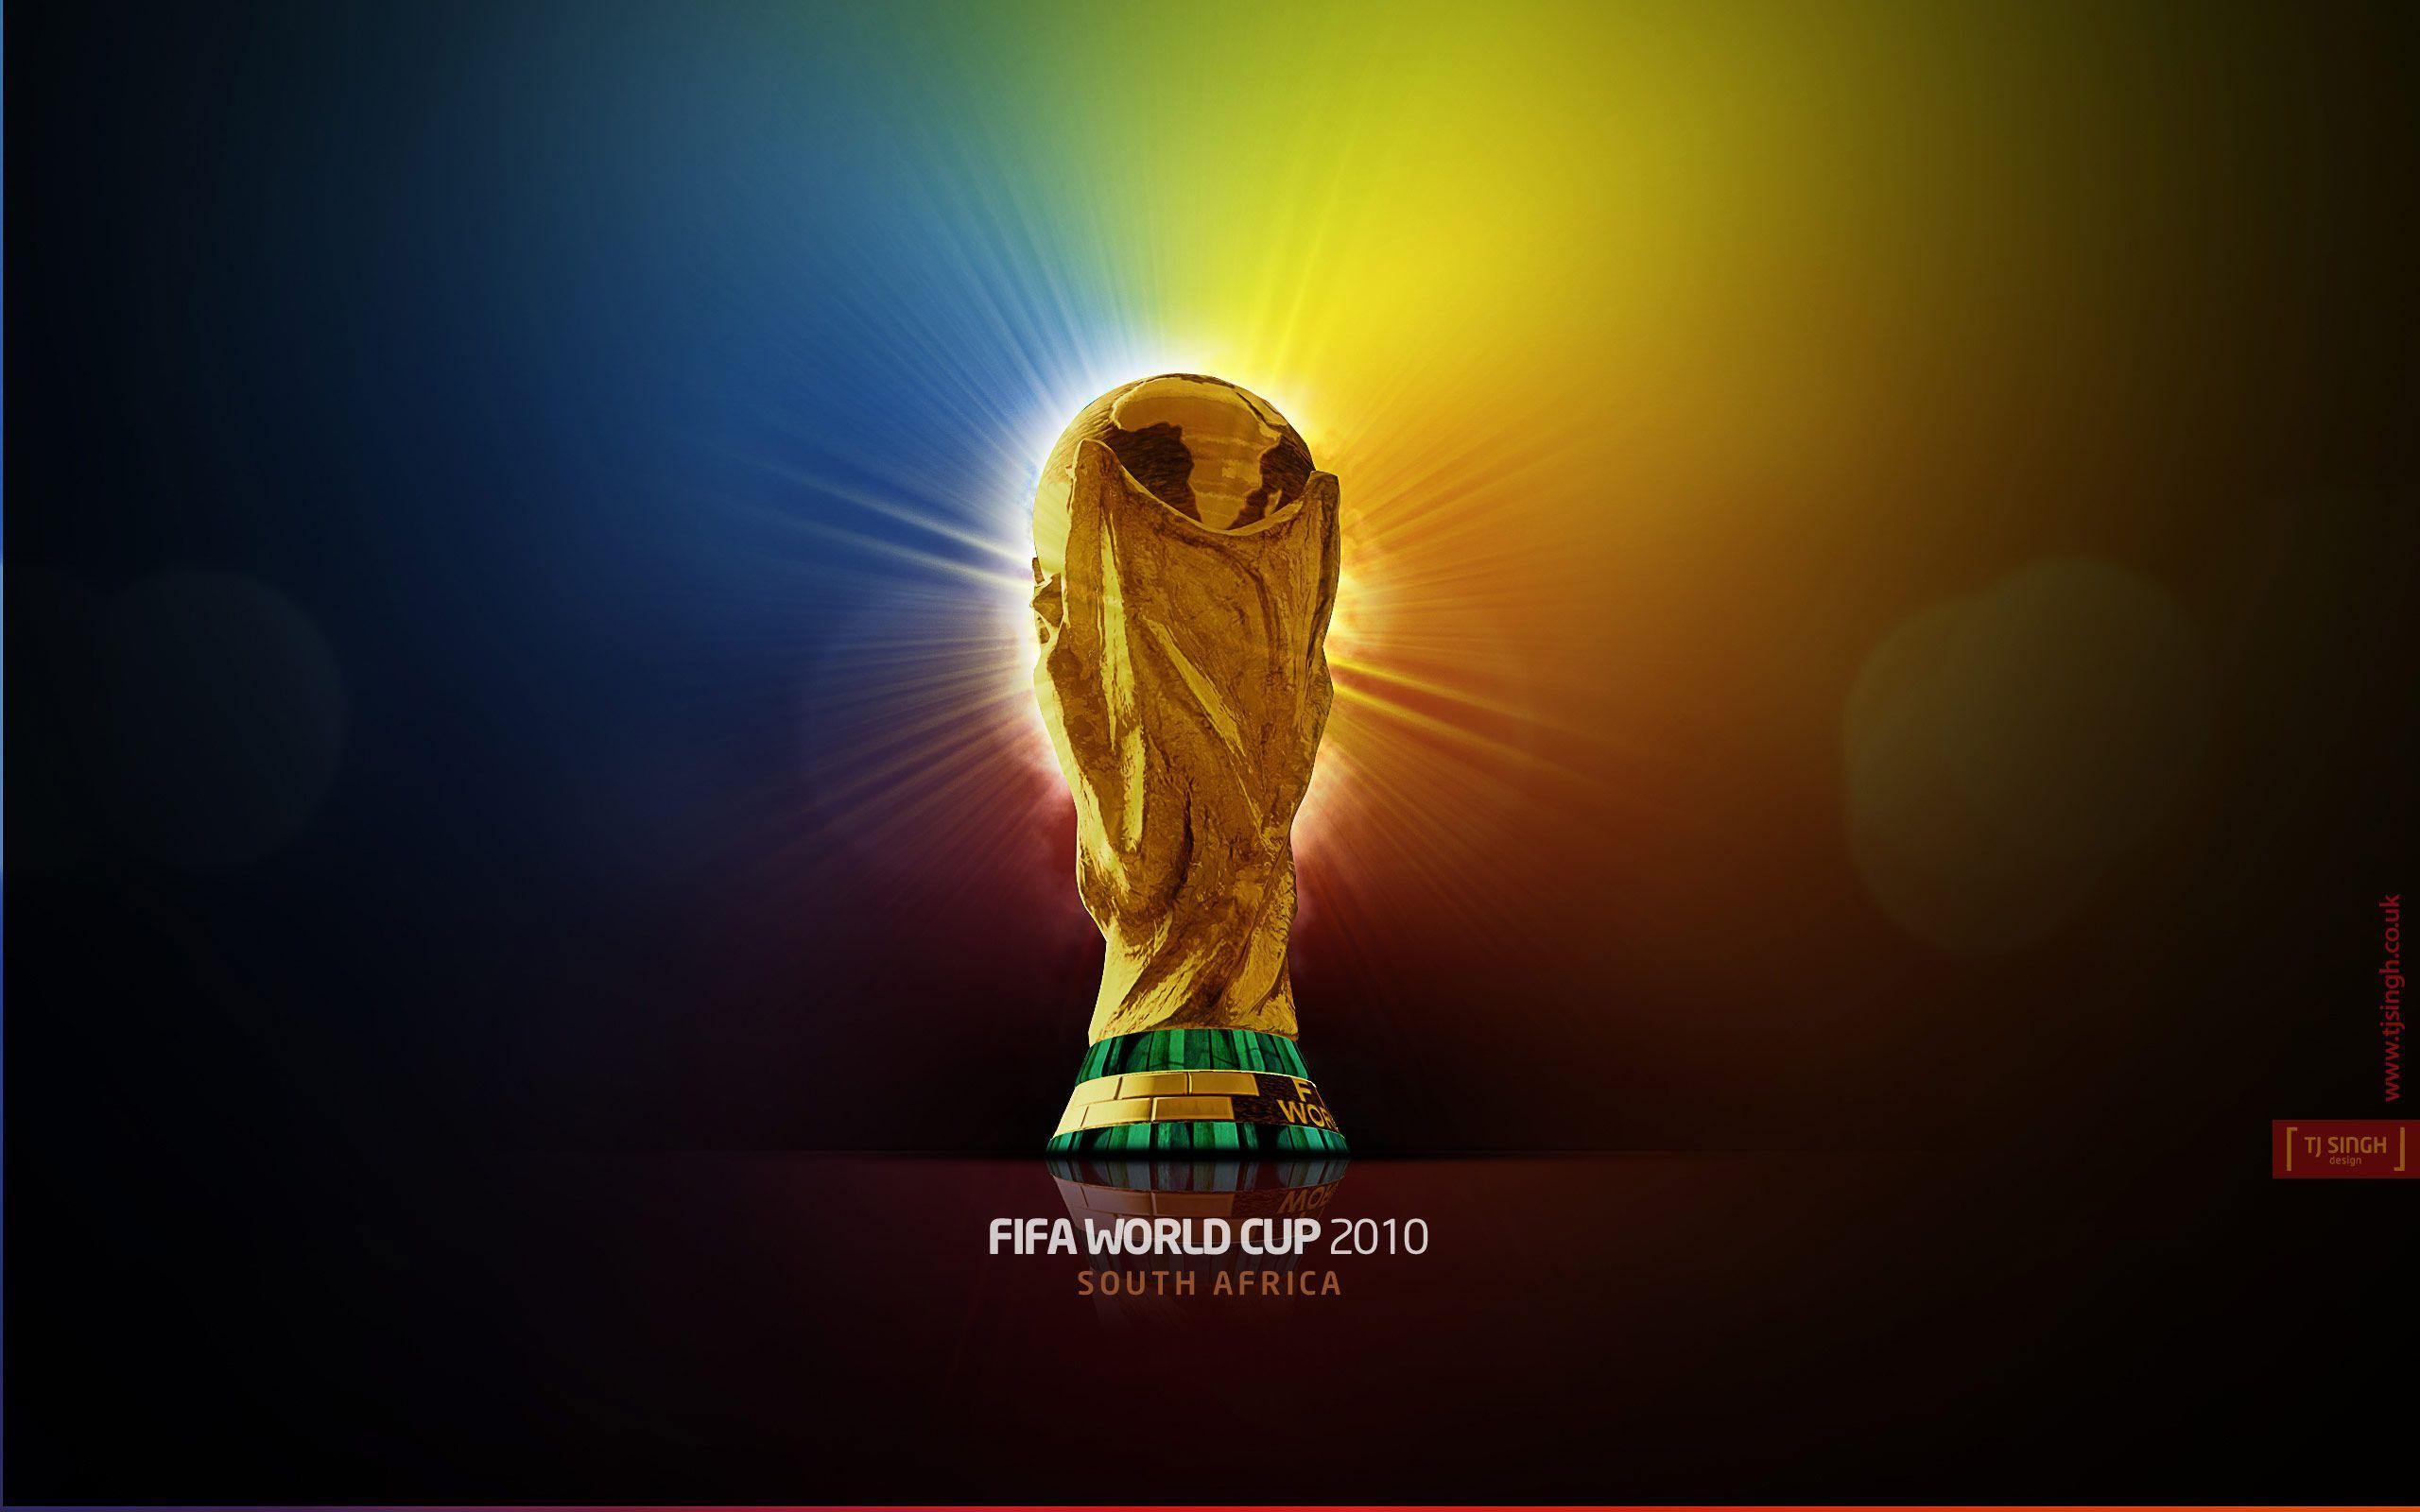 fifa world cup south africa 2010 Full HD Wallpaper and Background